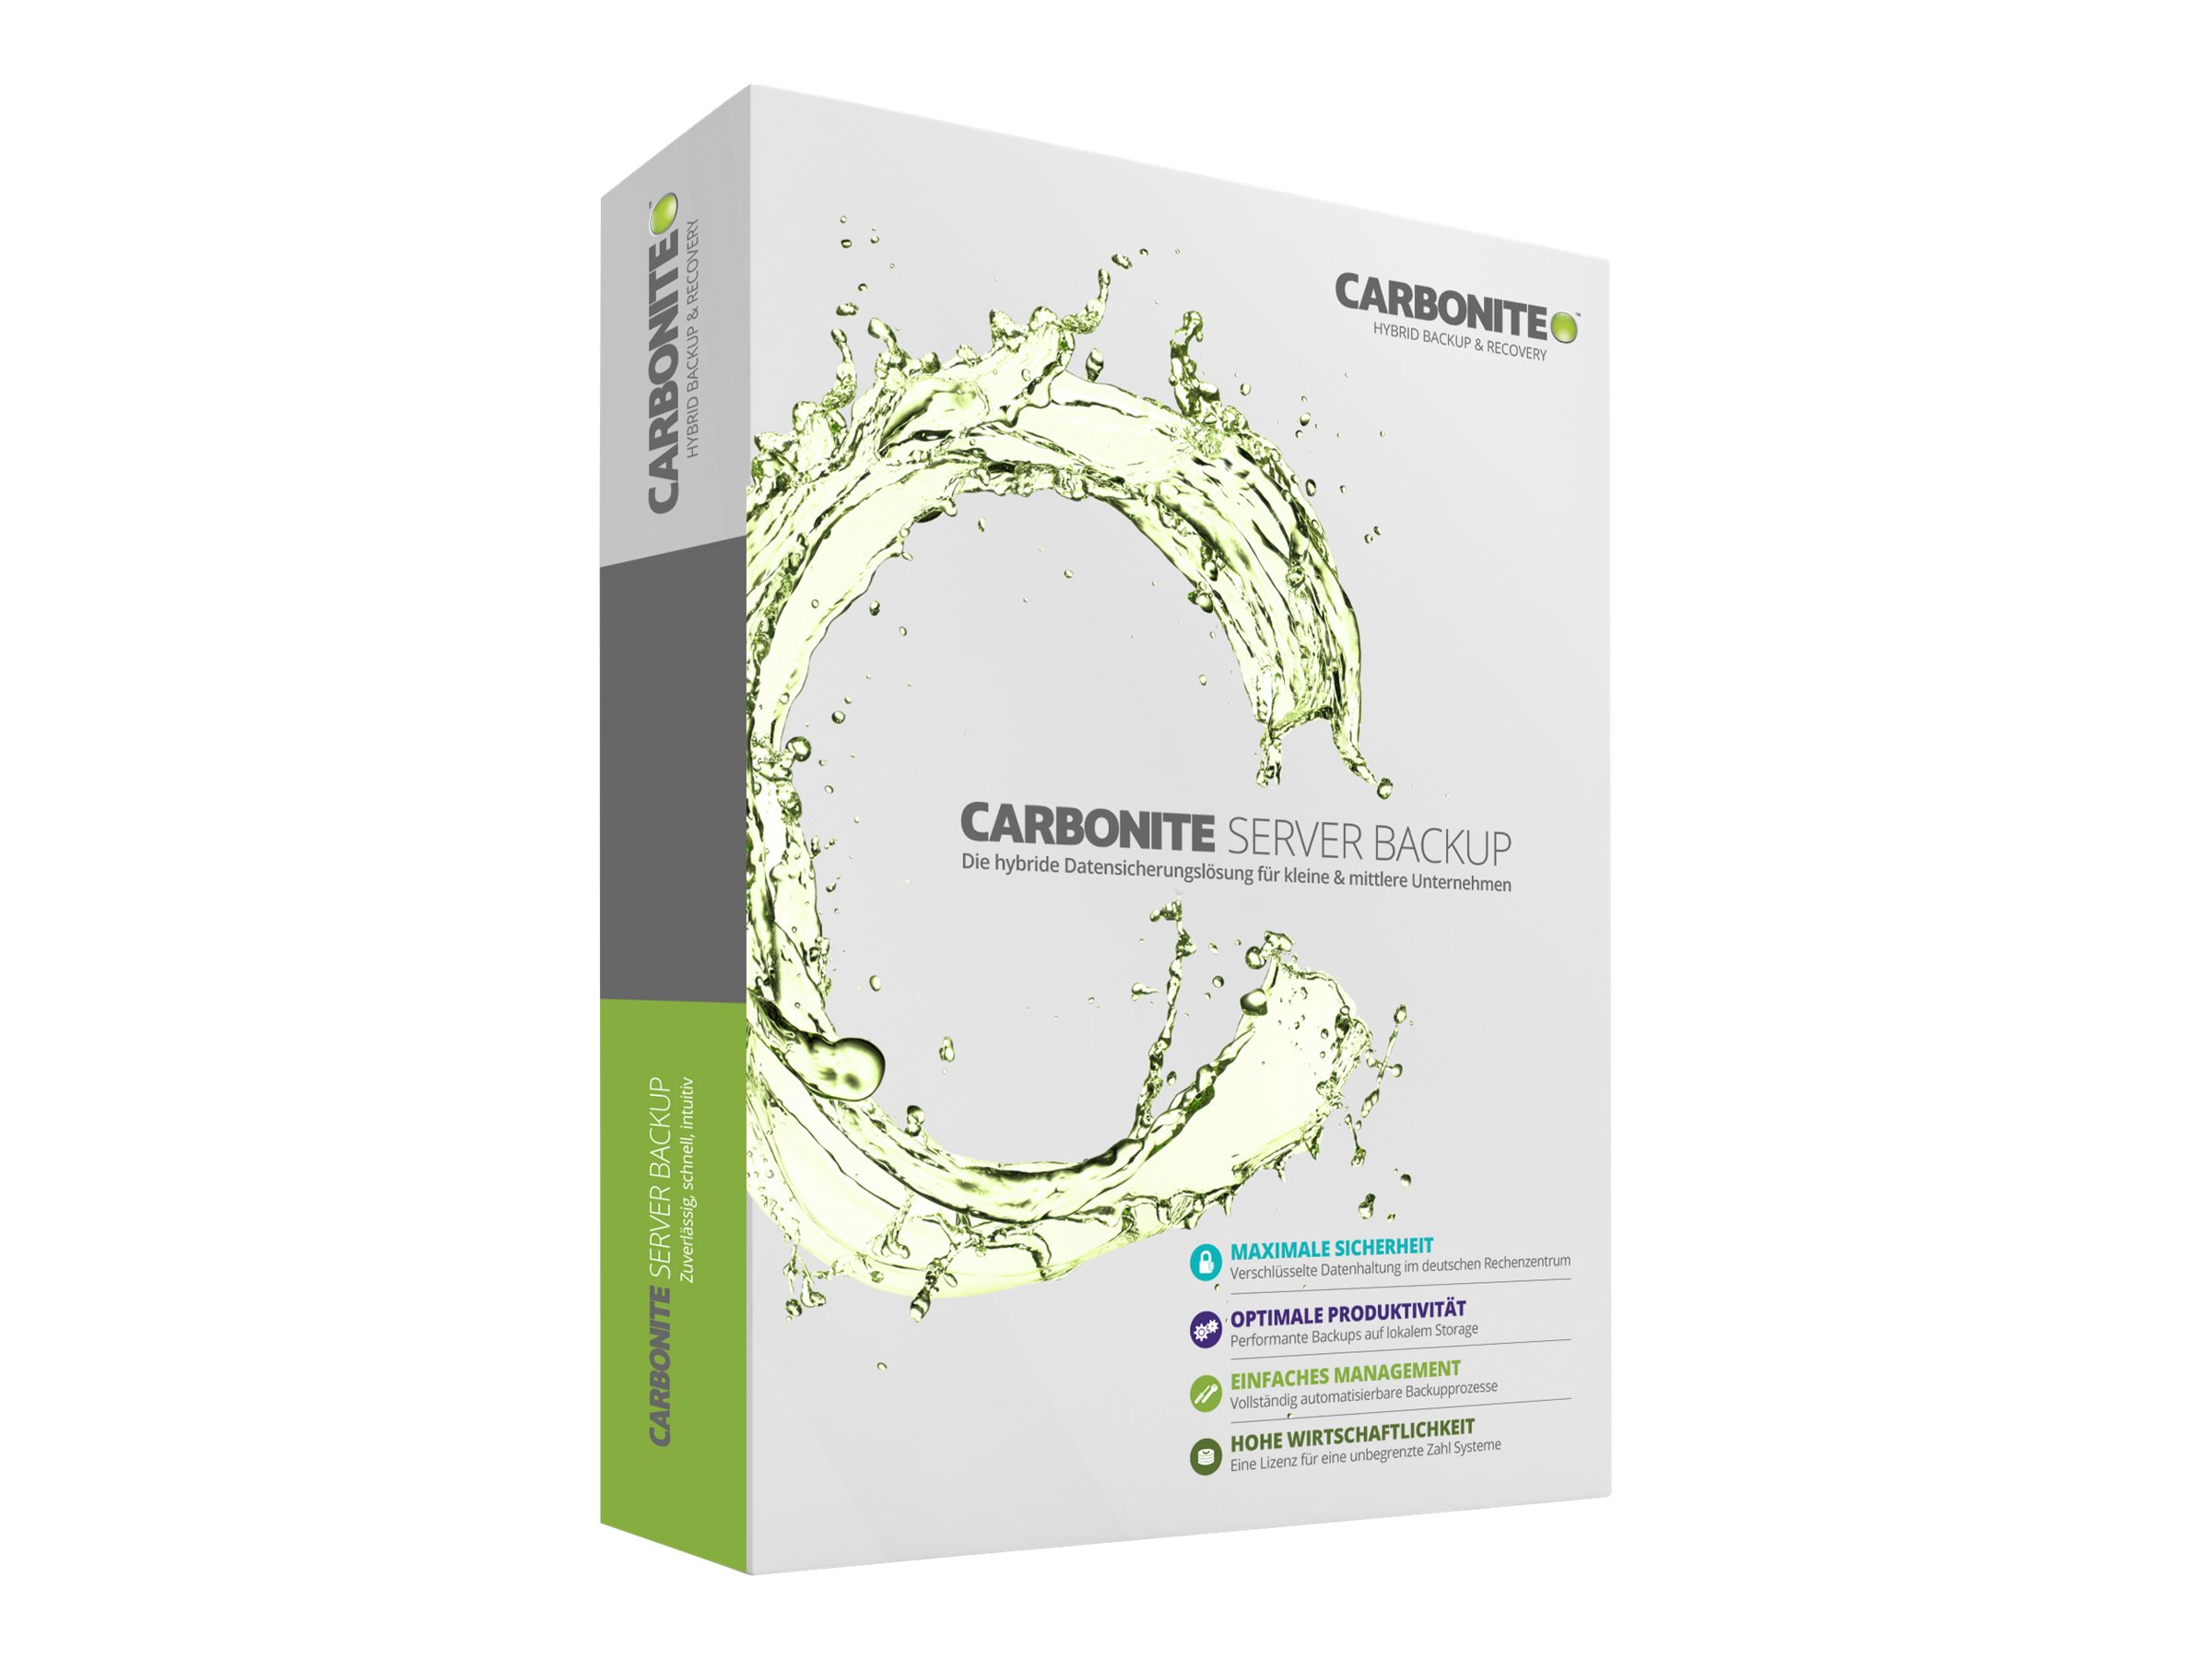 Carbonite Extra Storage for Business - subscription license (1 year) - additional 100 GB cloud storage space